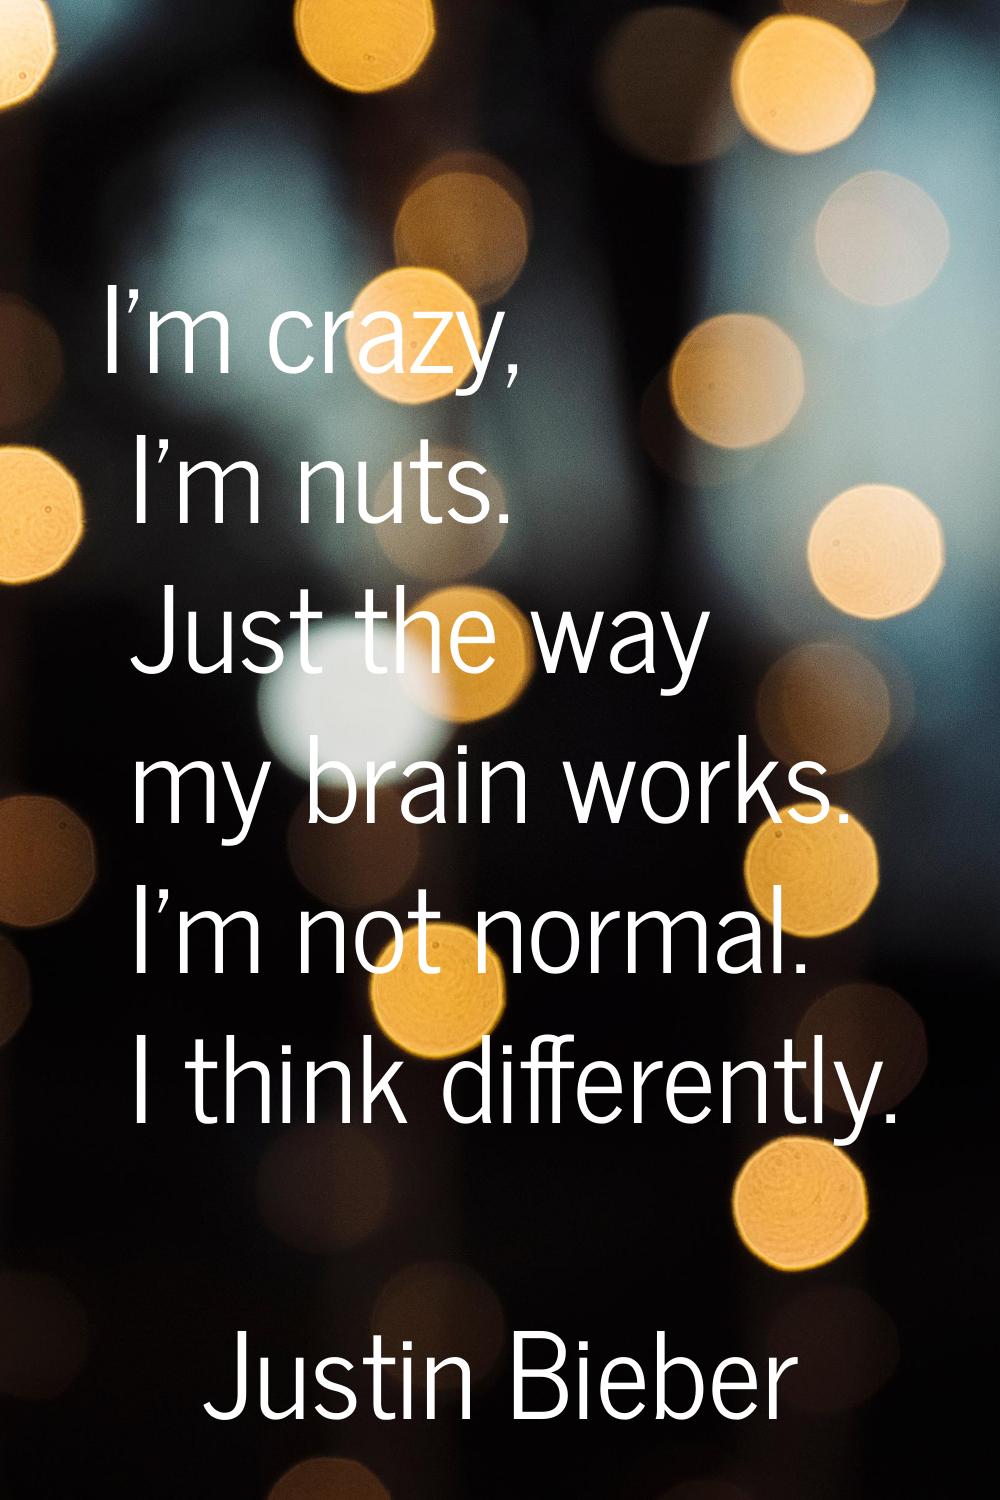 I'm crazy, I'm nuts. Just the way my brain works. I'm not normal. I think differently.